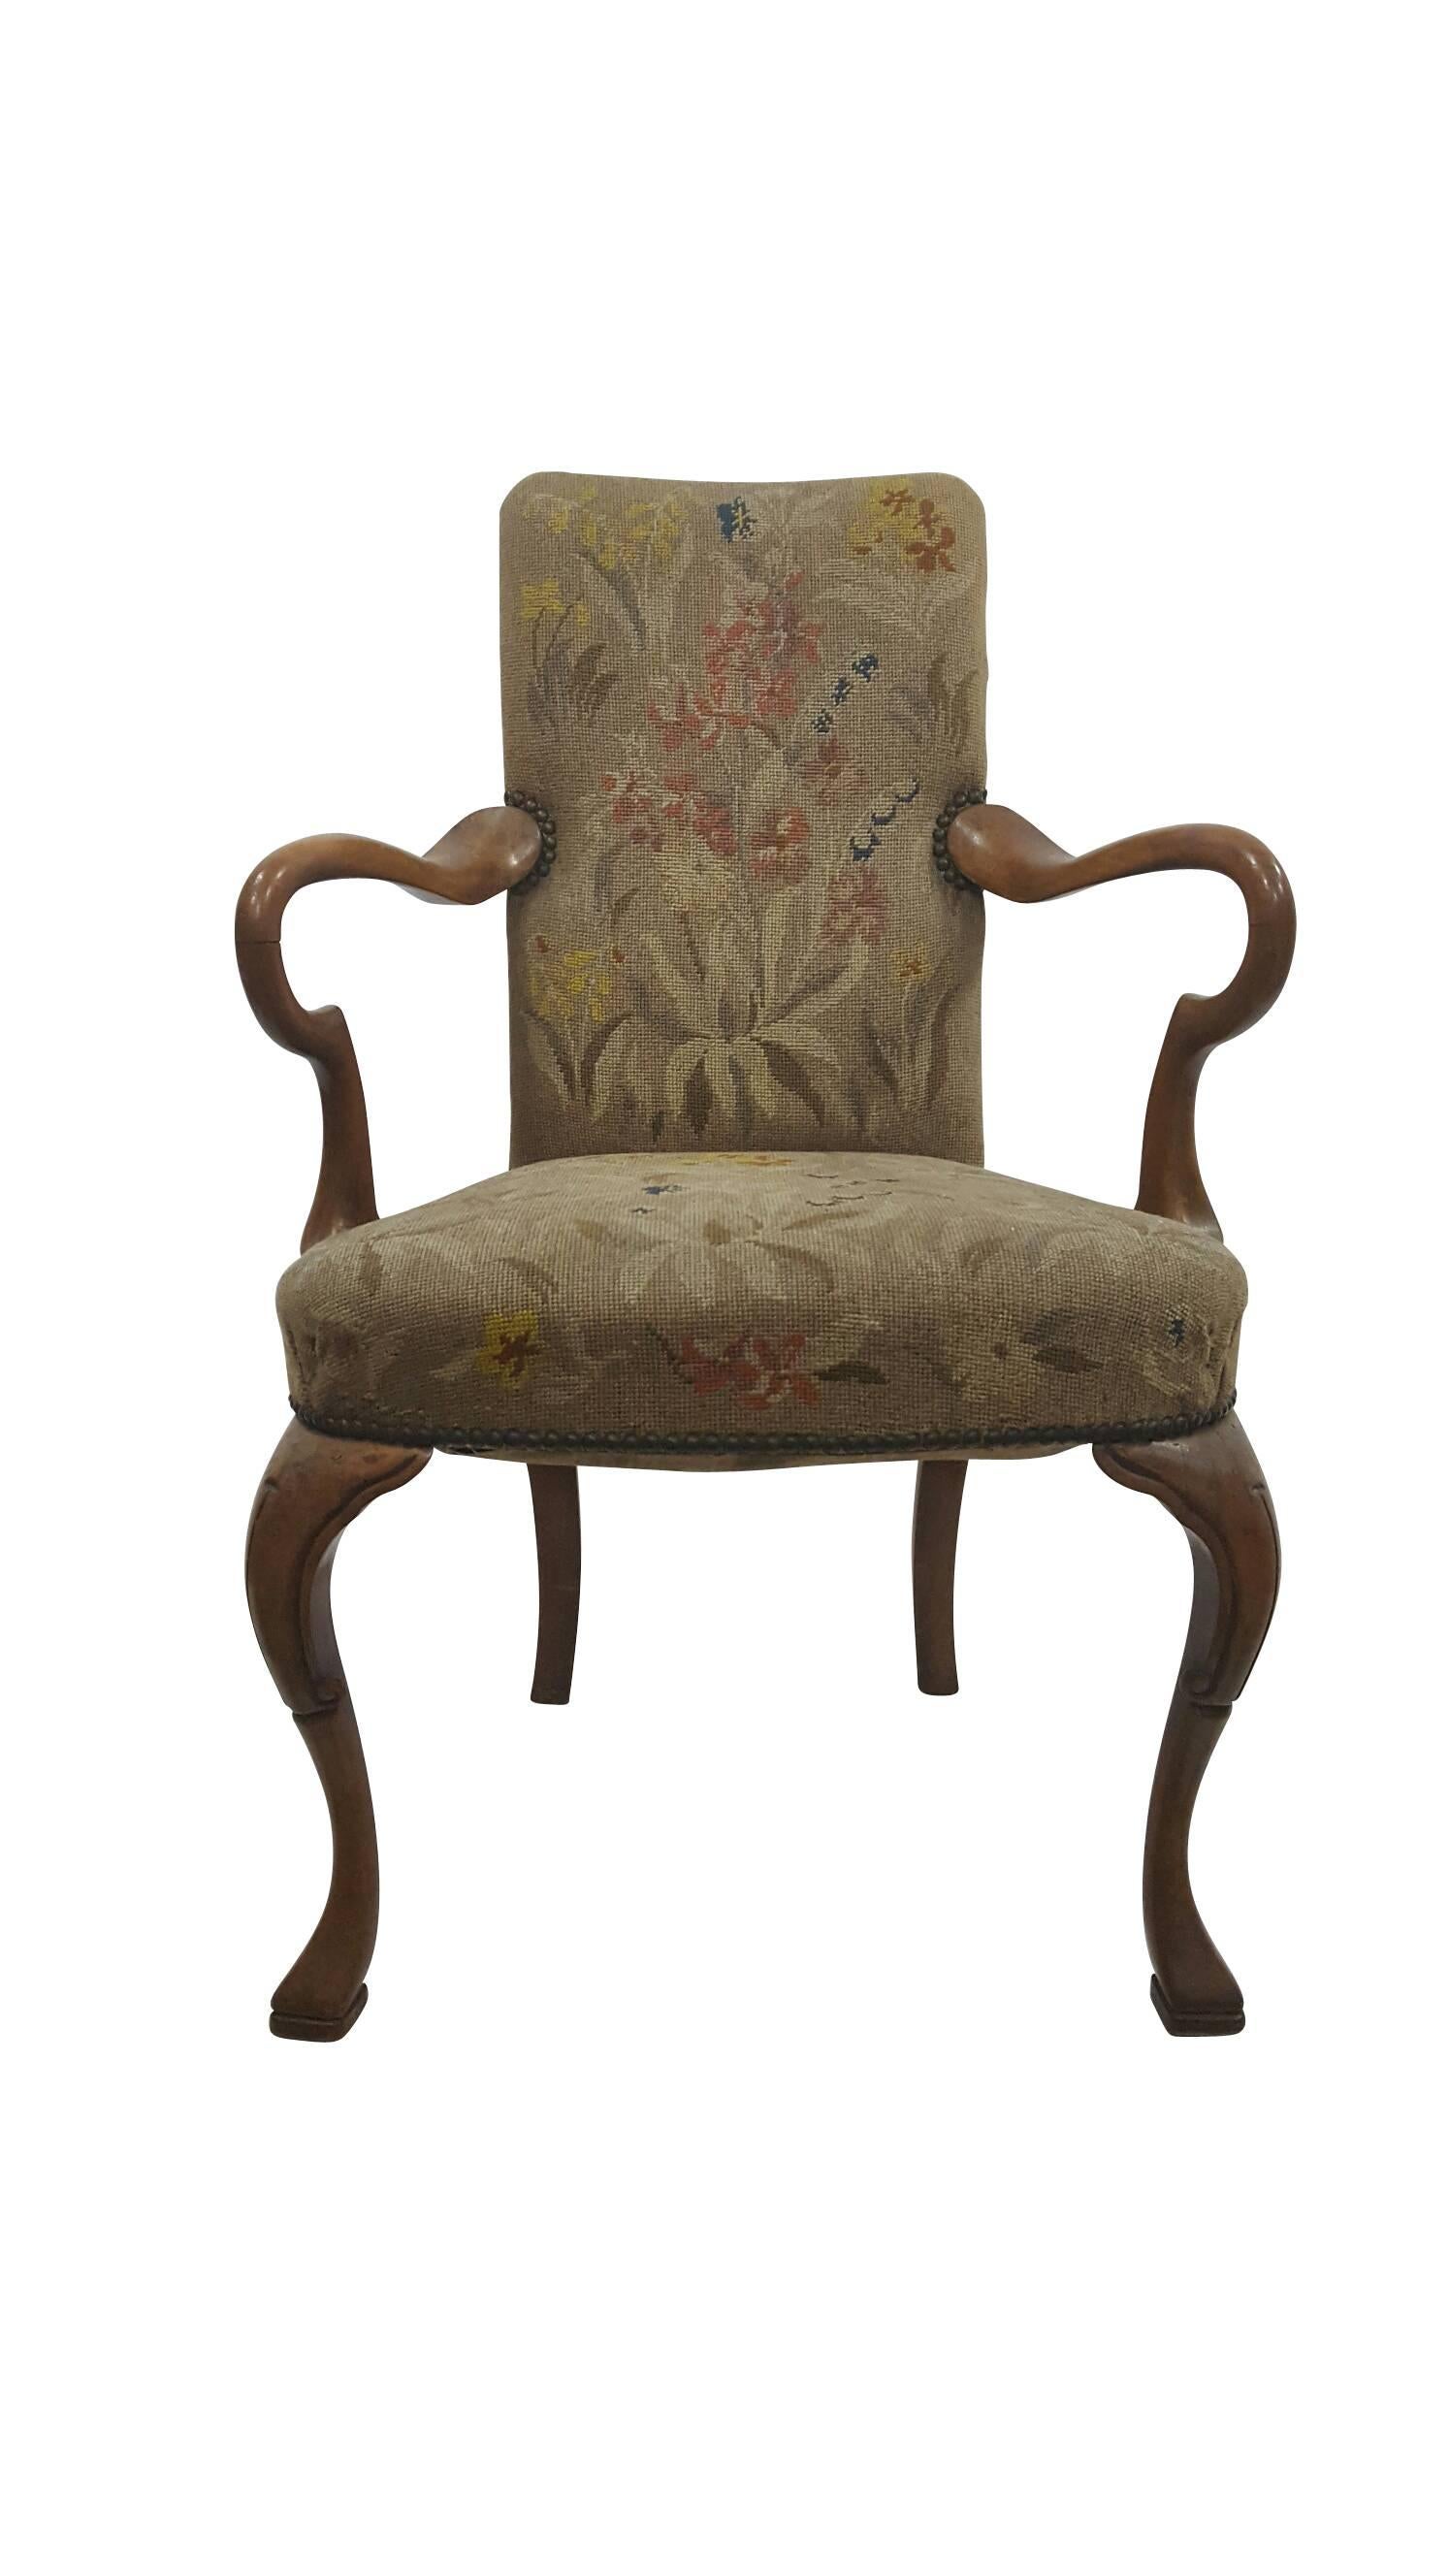 Hand-Carved 18th Century Antique Queen Anne Chair For Sale